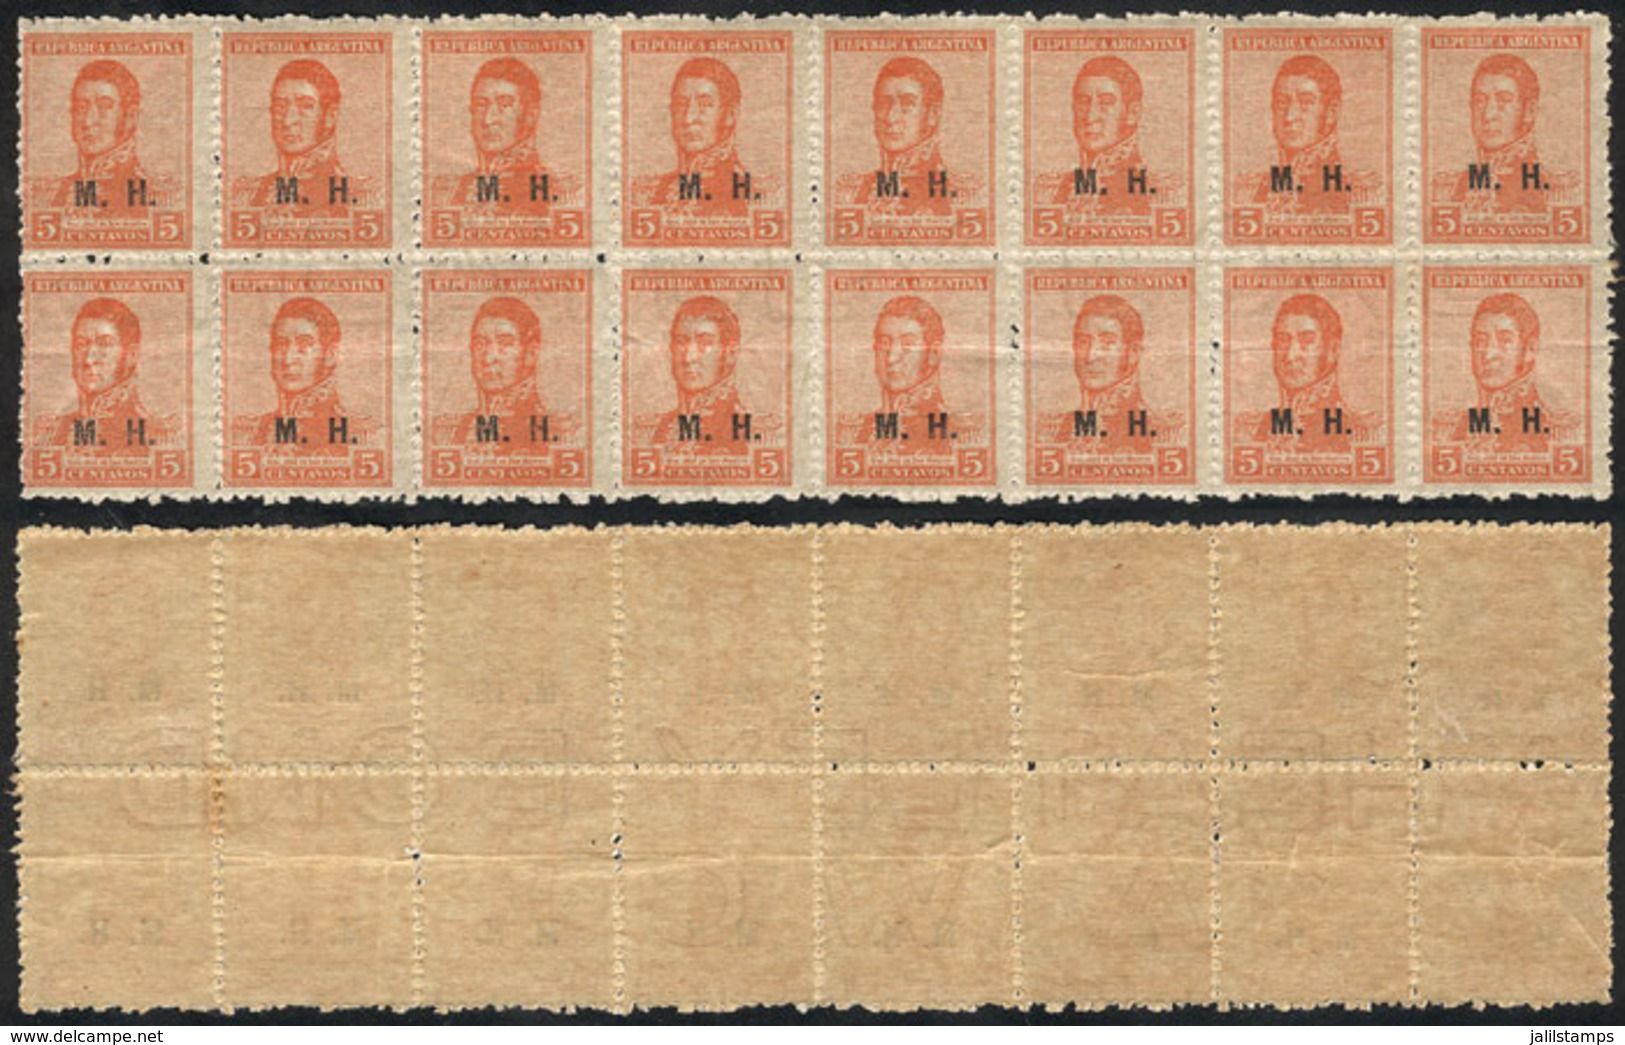 ARGENTINA: GJ.237, 1918 5c. San Martín With Wheatley Bond Wmk, Fantastic Block Of 16, ALL WATERMARKED, The COMPLETE Wate - Service